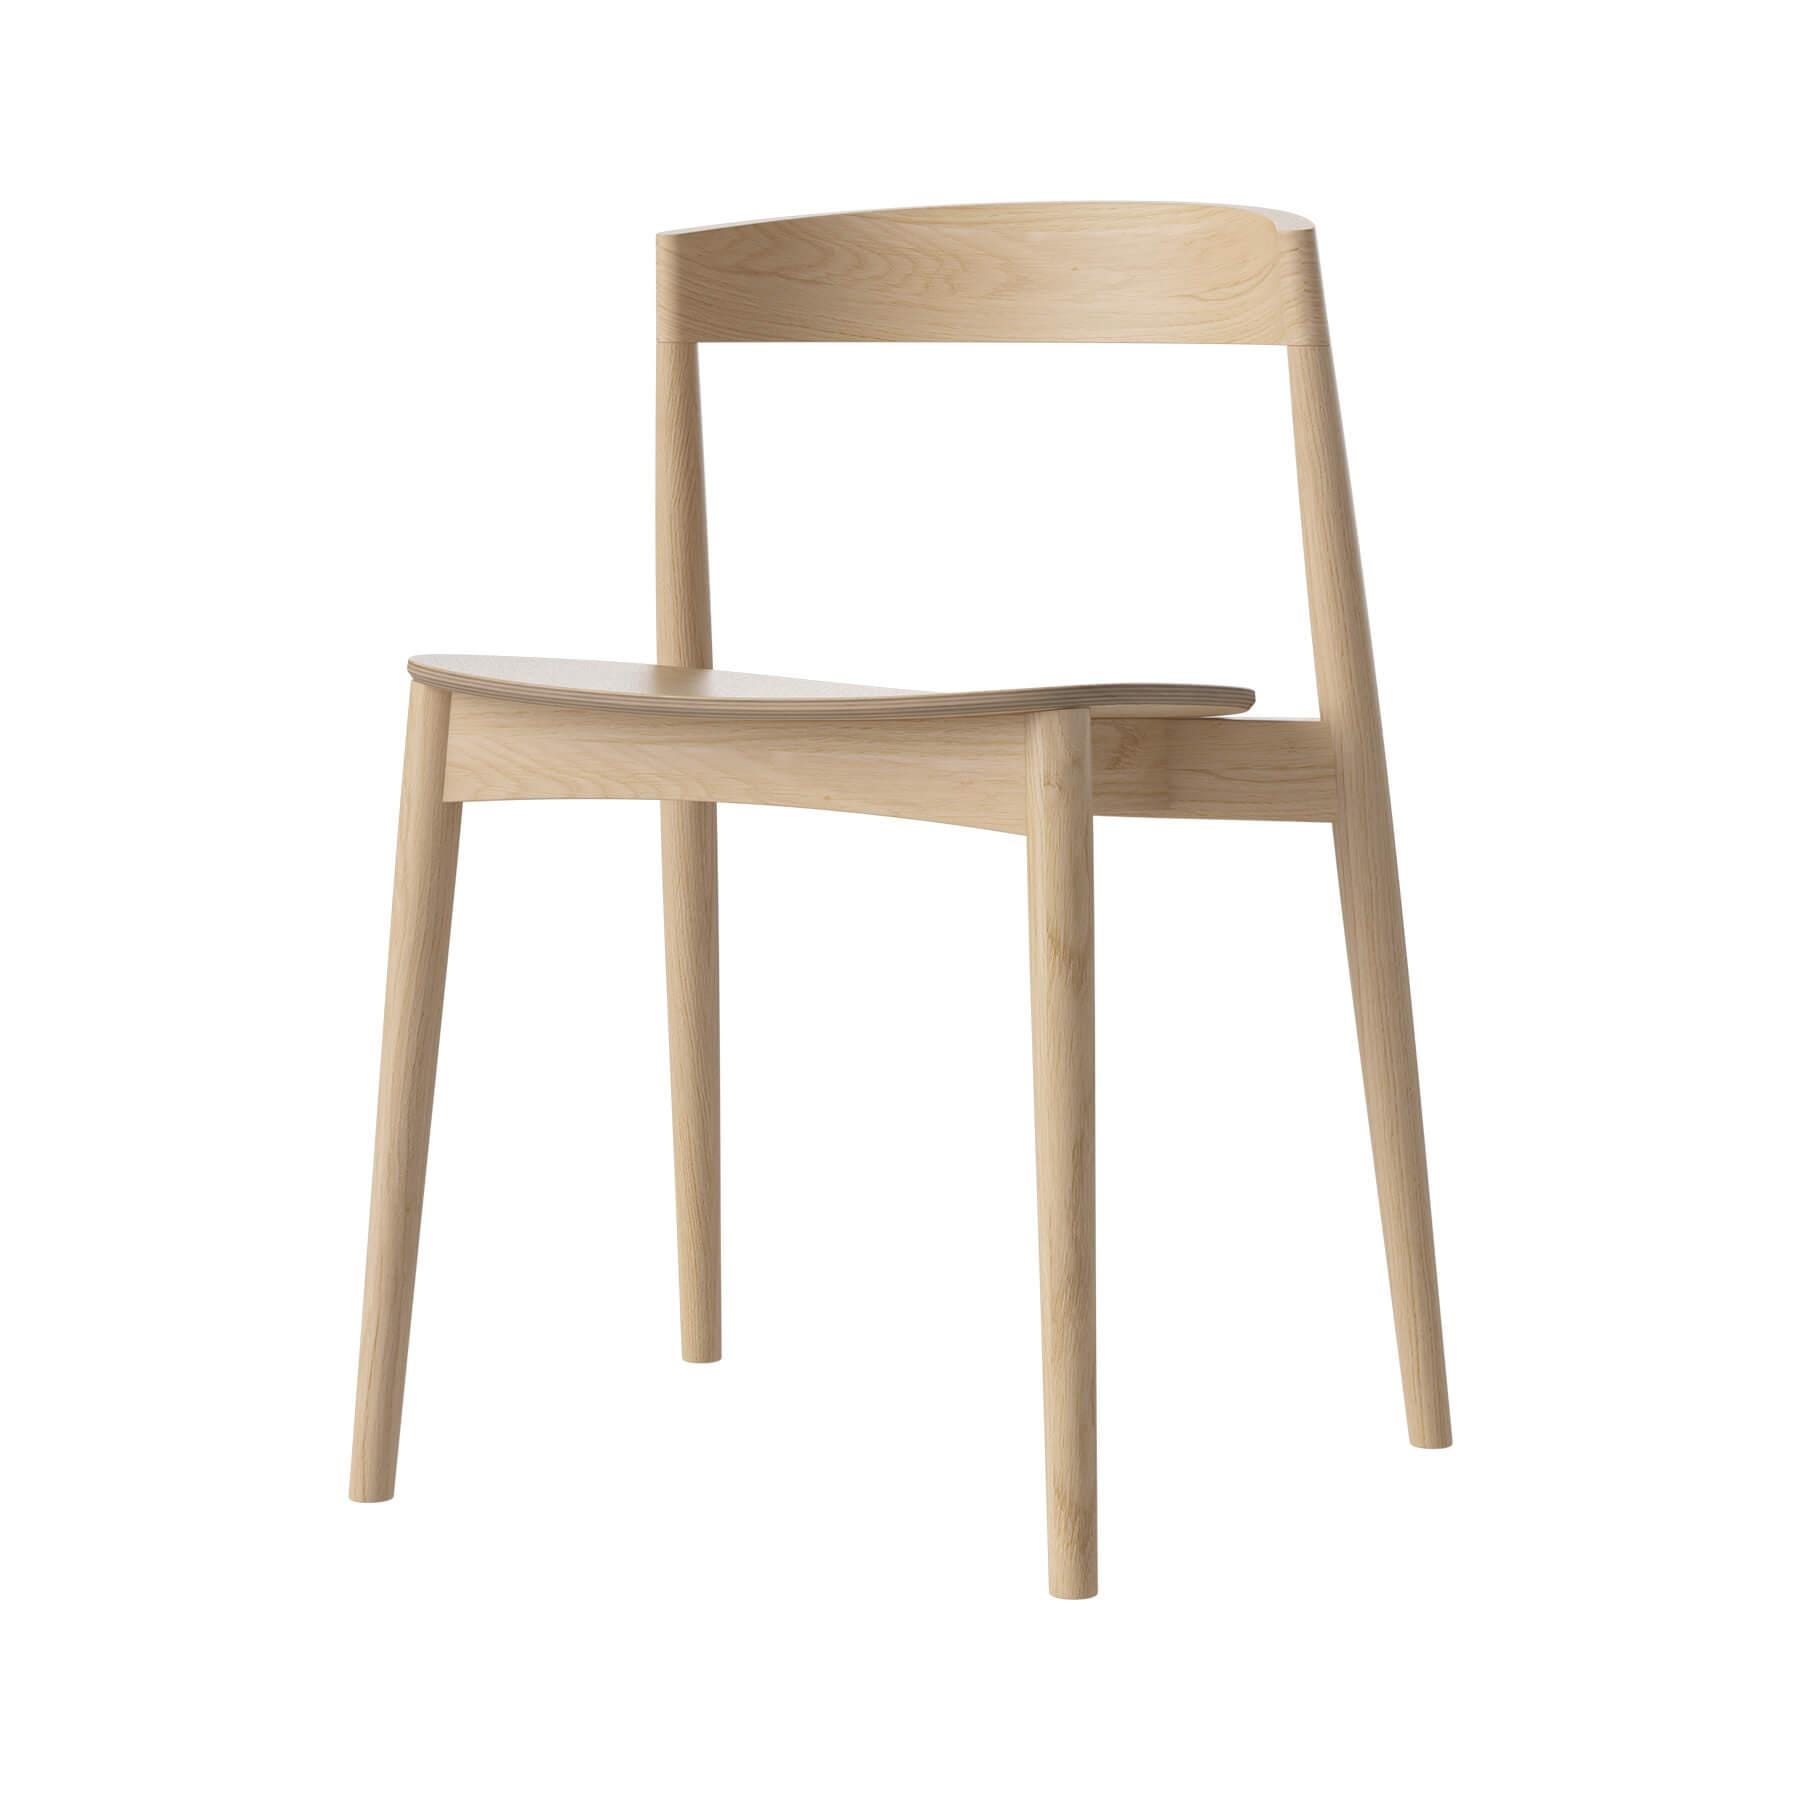 Bolia Kite Dining Chair White Oiled Oak Light Wood Designer Furniture From Holloways Of Ludlow